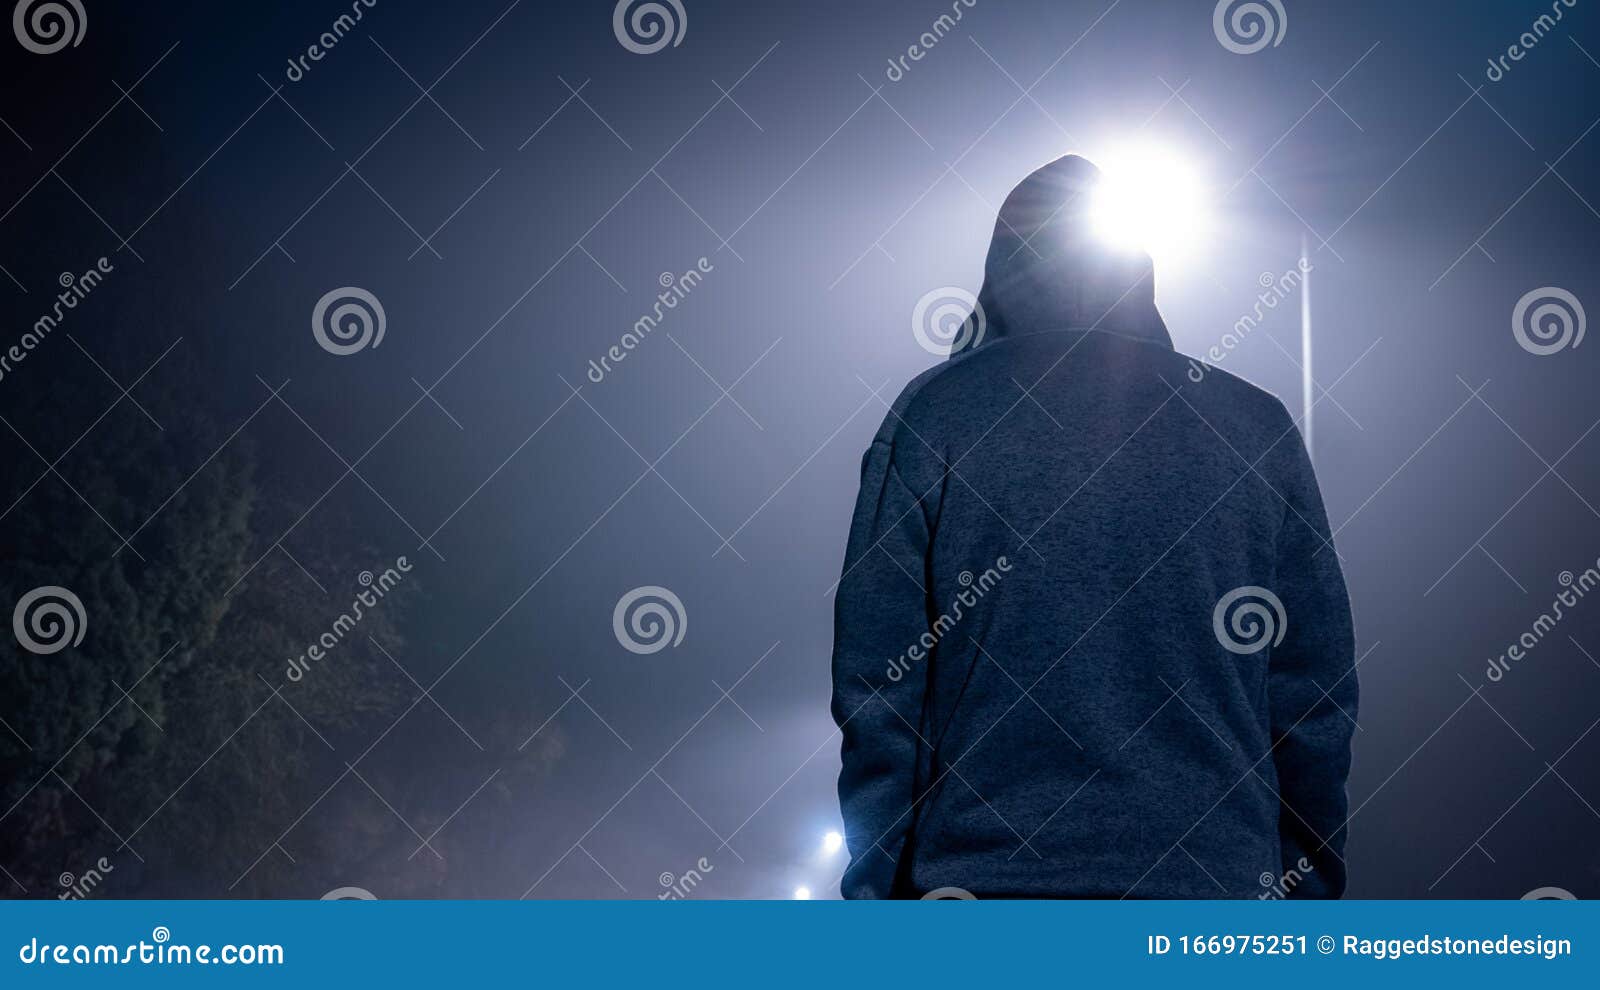 looking up from behind at a mysterious, moody, hooded figure. on a foggy winters night, with street lights behind